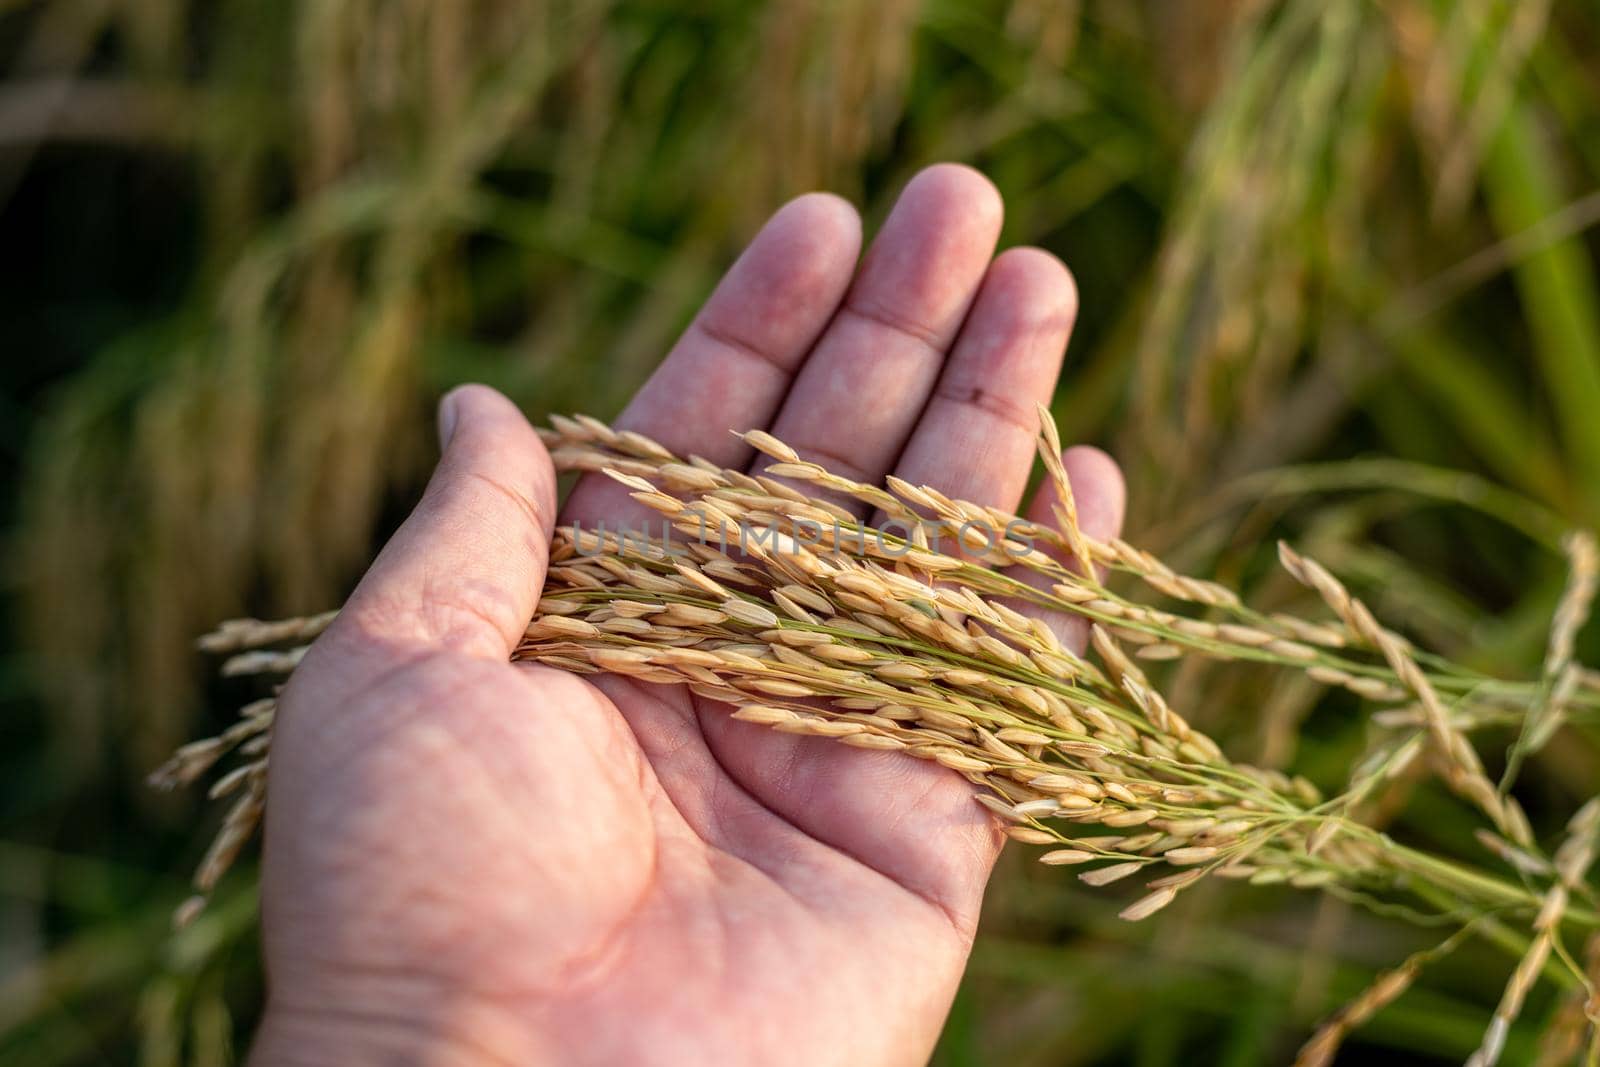 Farmer holding rice ears in hand for examining and inspection by Bilalphotos